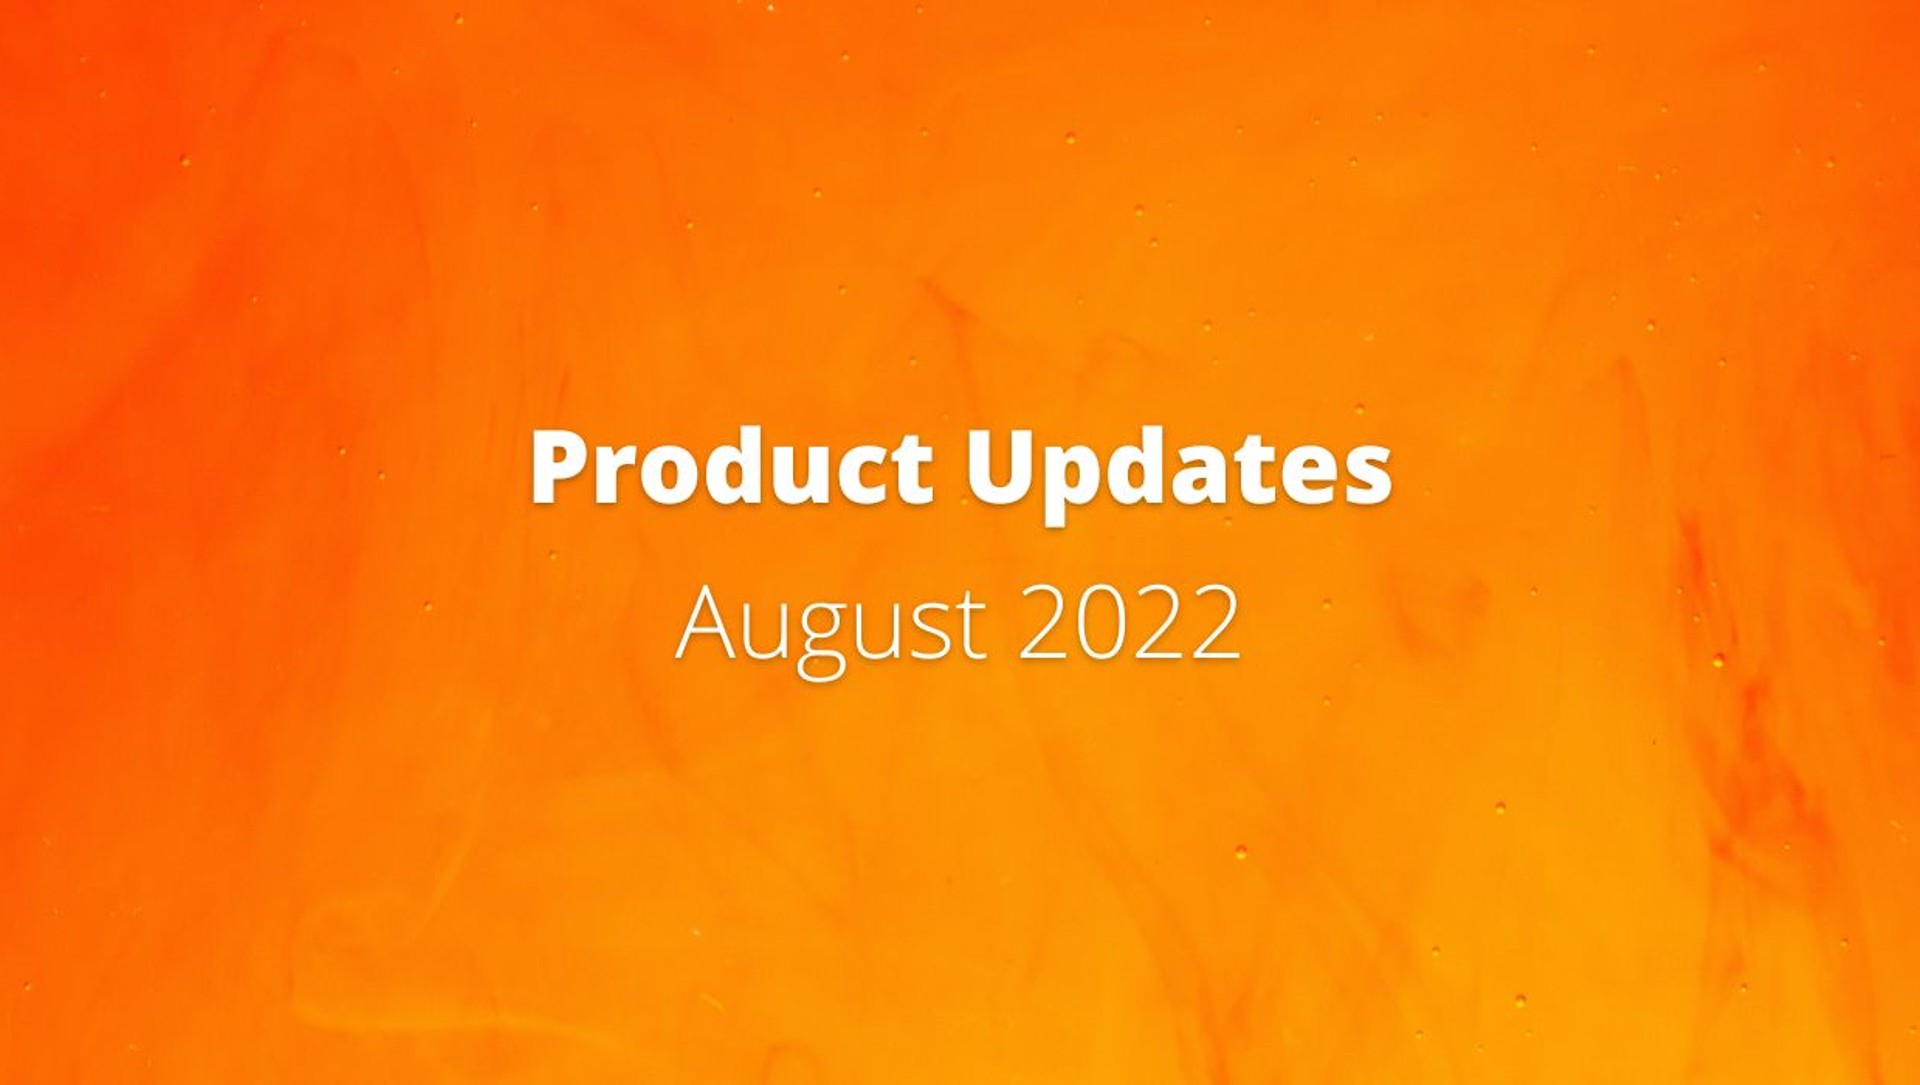 Product Updates - August 2022